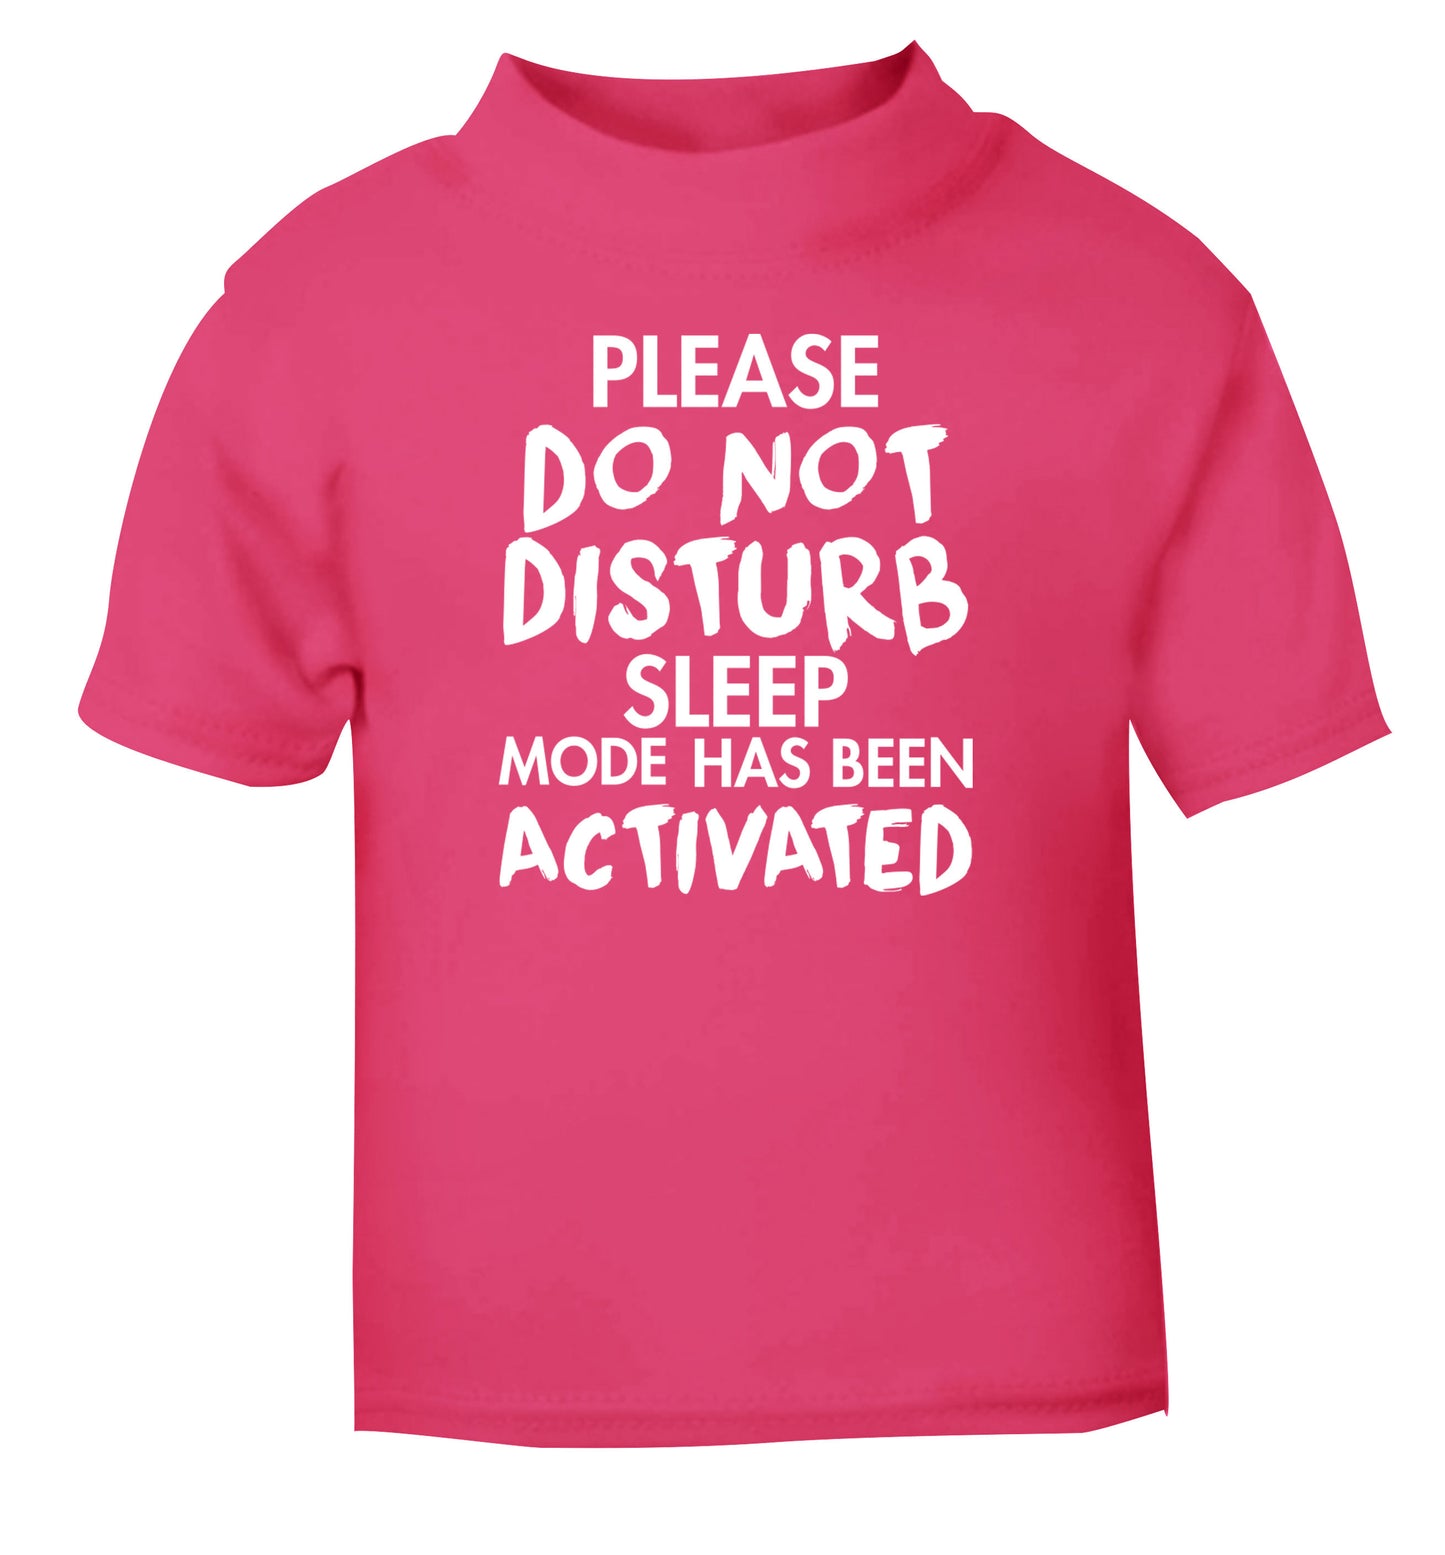 Please do not disturb sleeping mode has been activated pink Baby Toddler Tshirt 2 Years